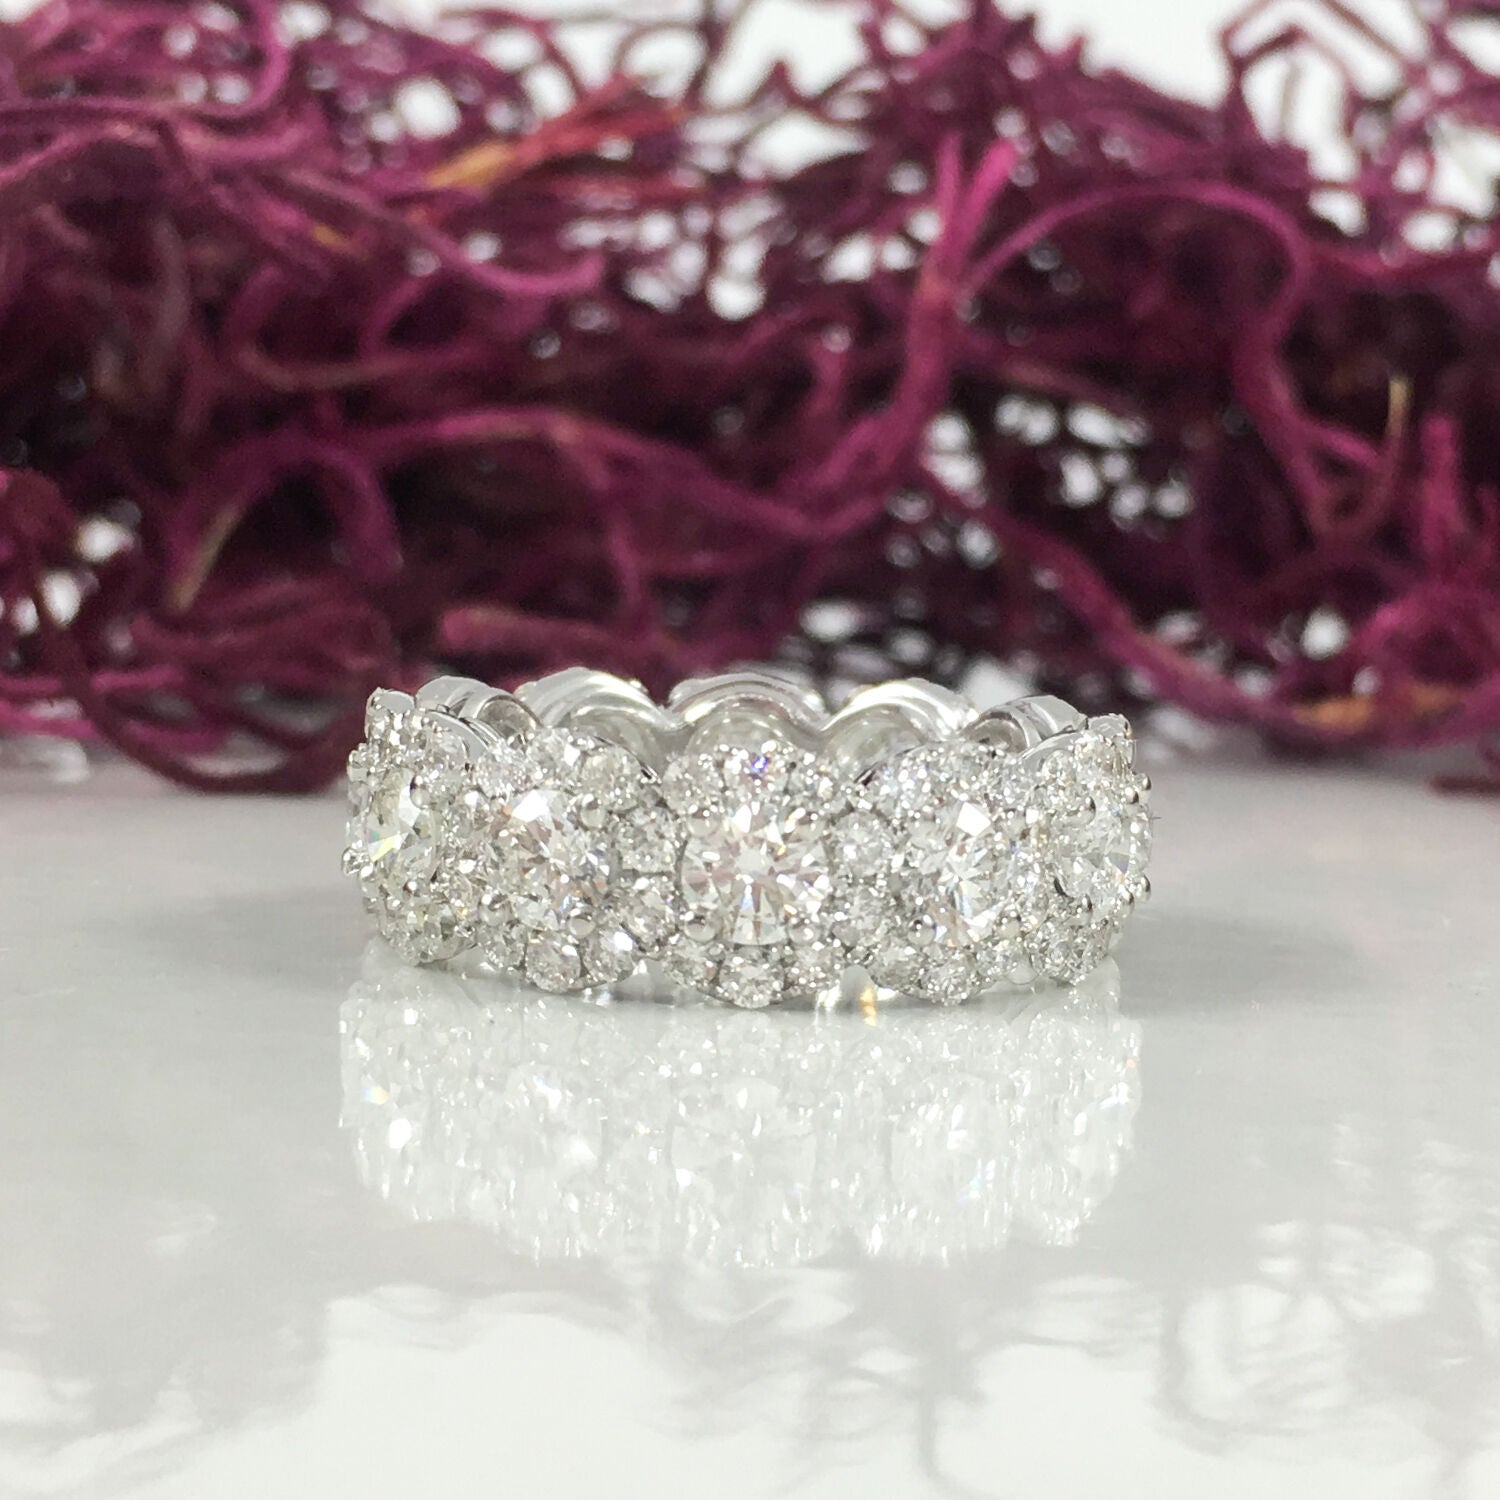 12 center diamonds (0.17 CT / 3.6mm each) and 96 side diamonds (0.02 CT / 1.8mm each) halo eternity engagement ring in 18k white gold. The ring is designed and handmade locally in Los Angeles by Sage Designs L.A. using earth-mined and conflict free